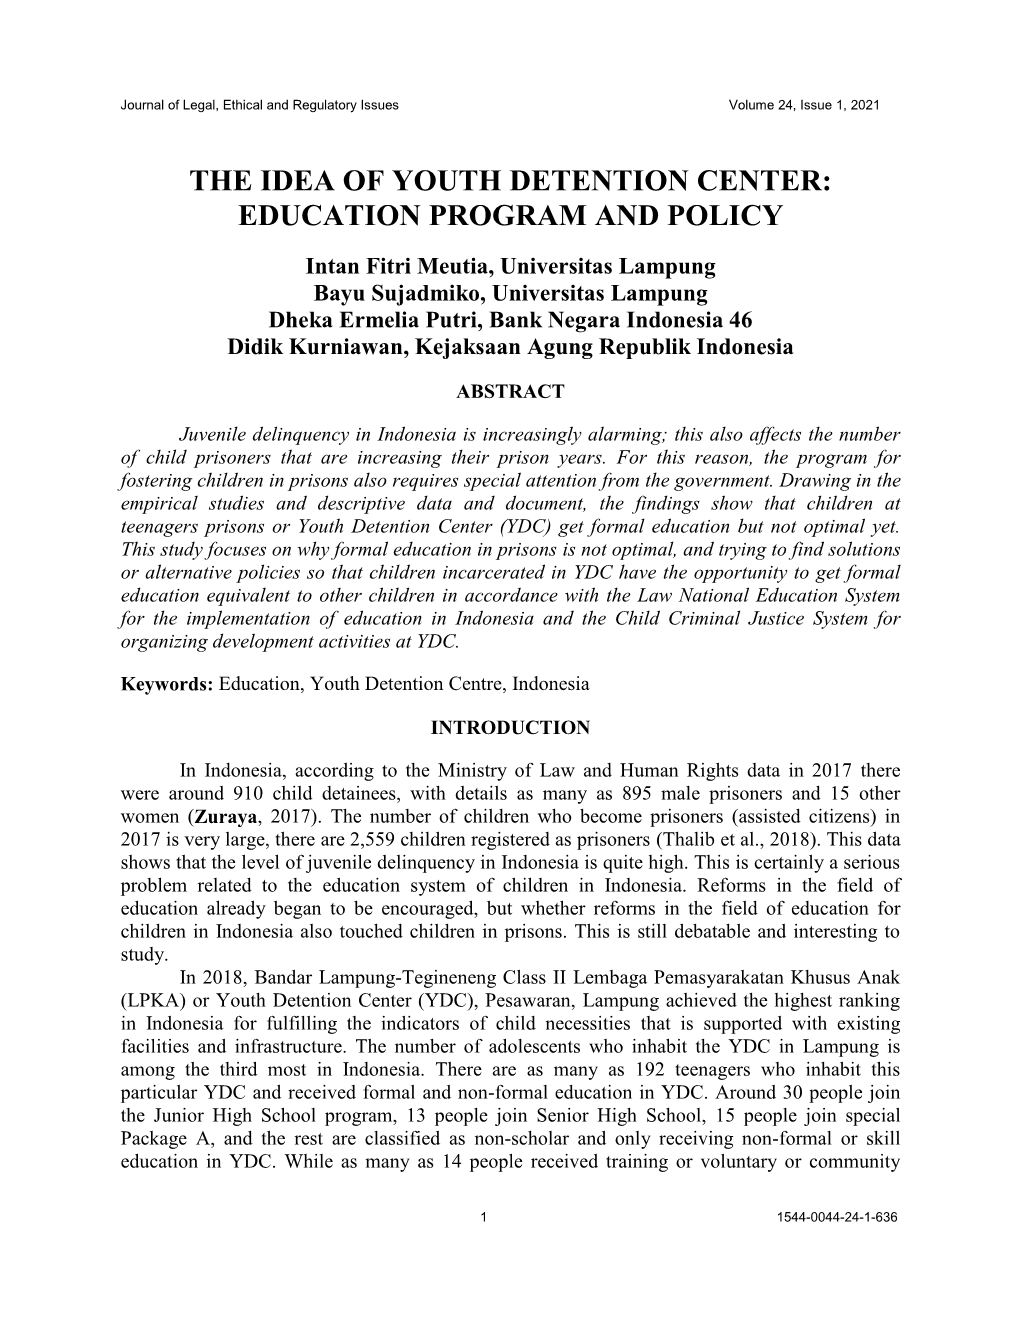 The Idea of Youth Detention Center: Education Program and Policy